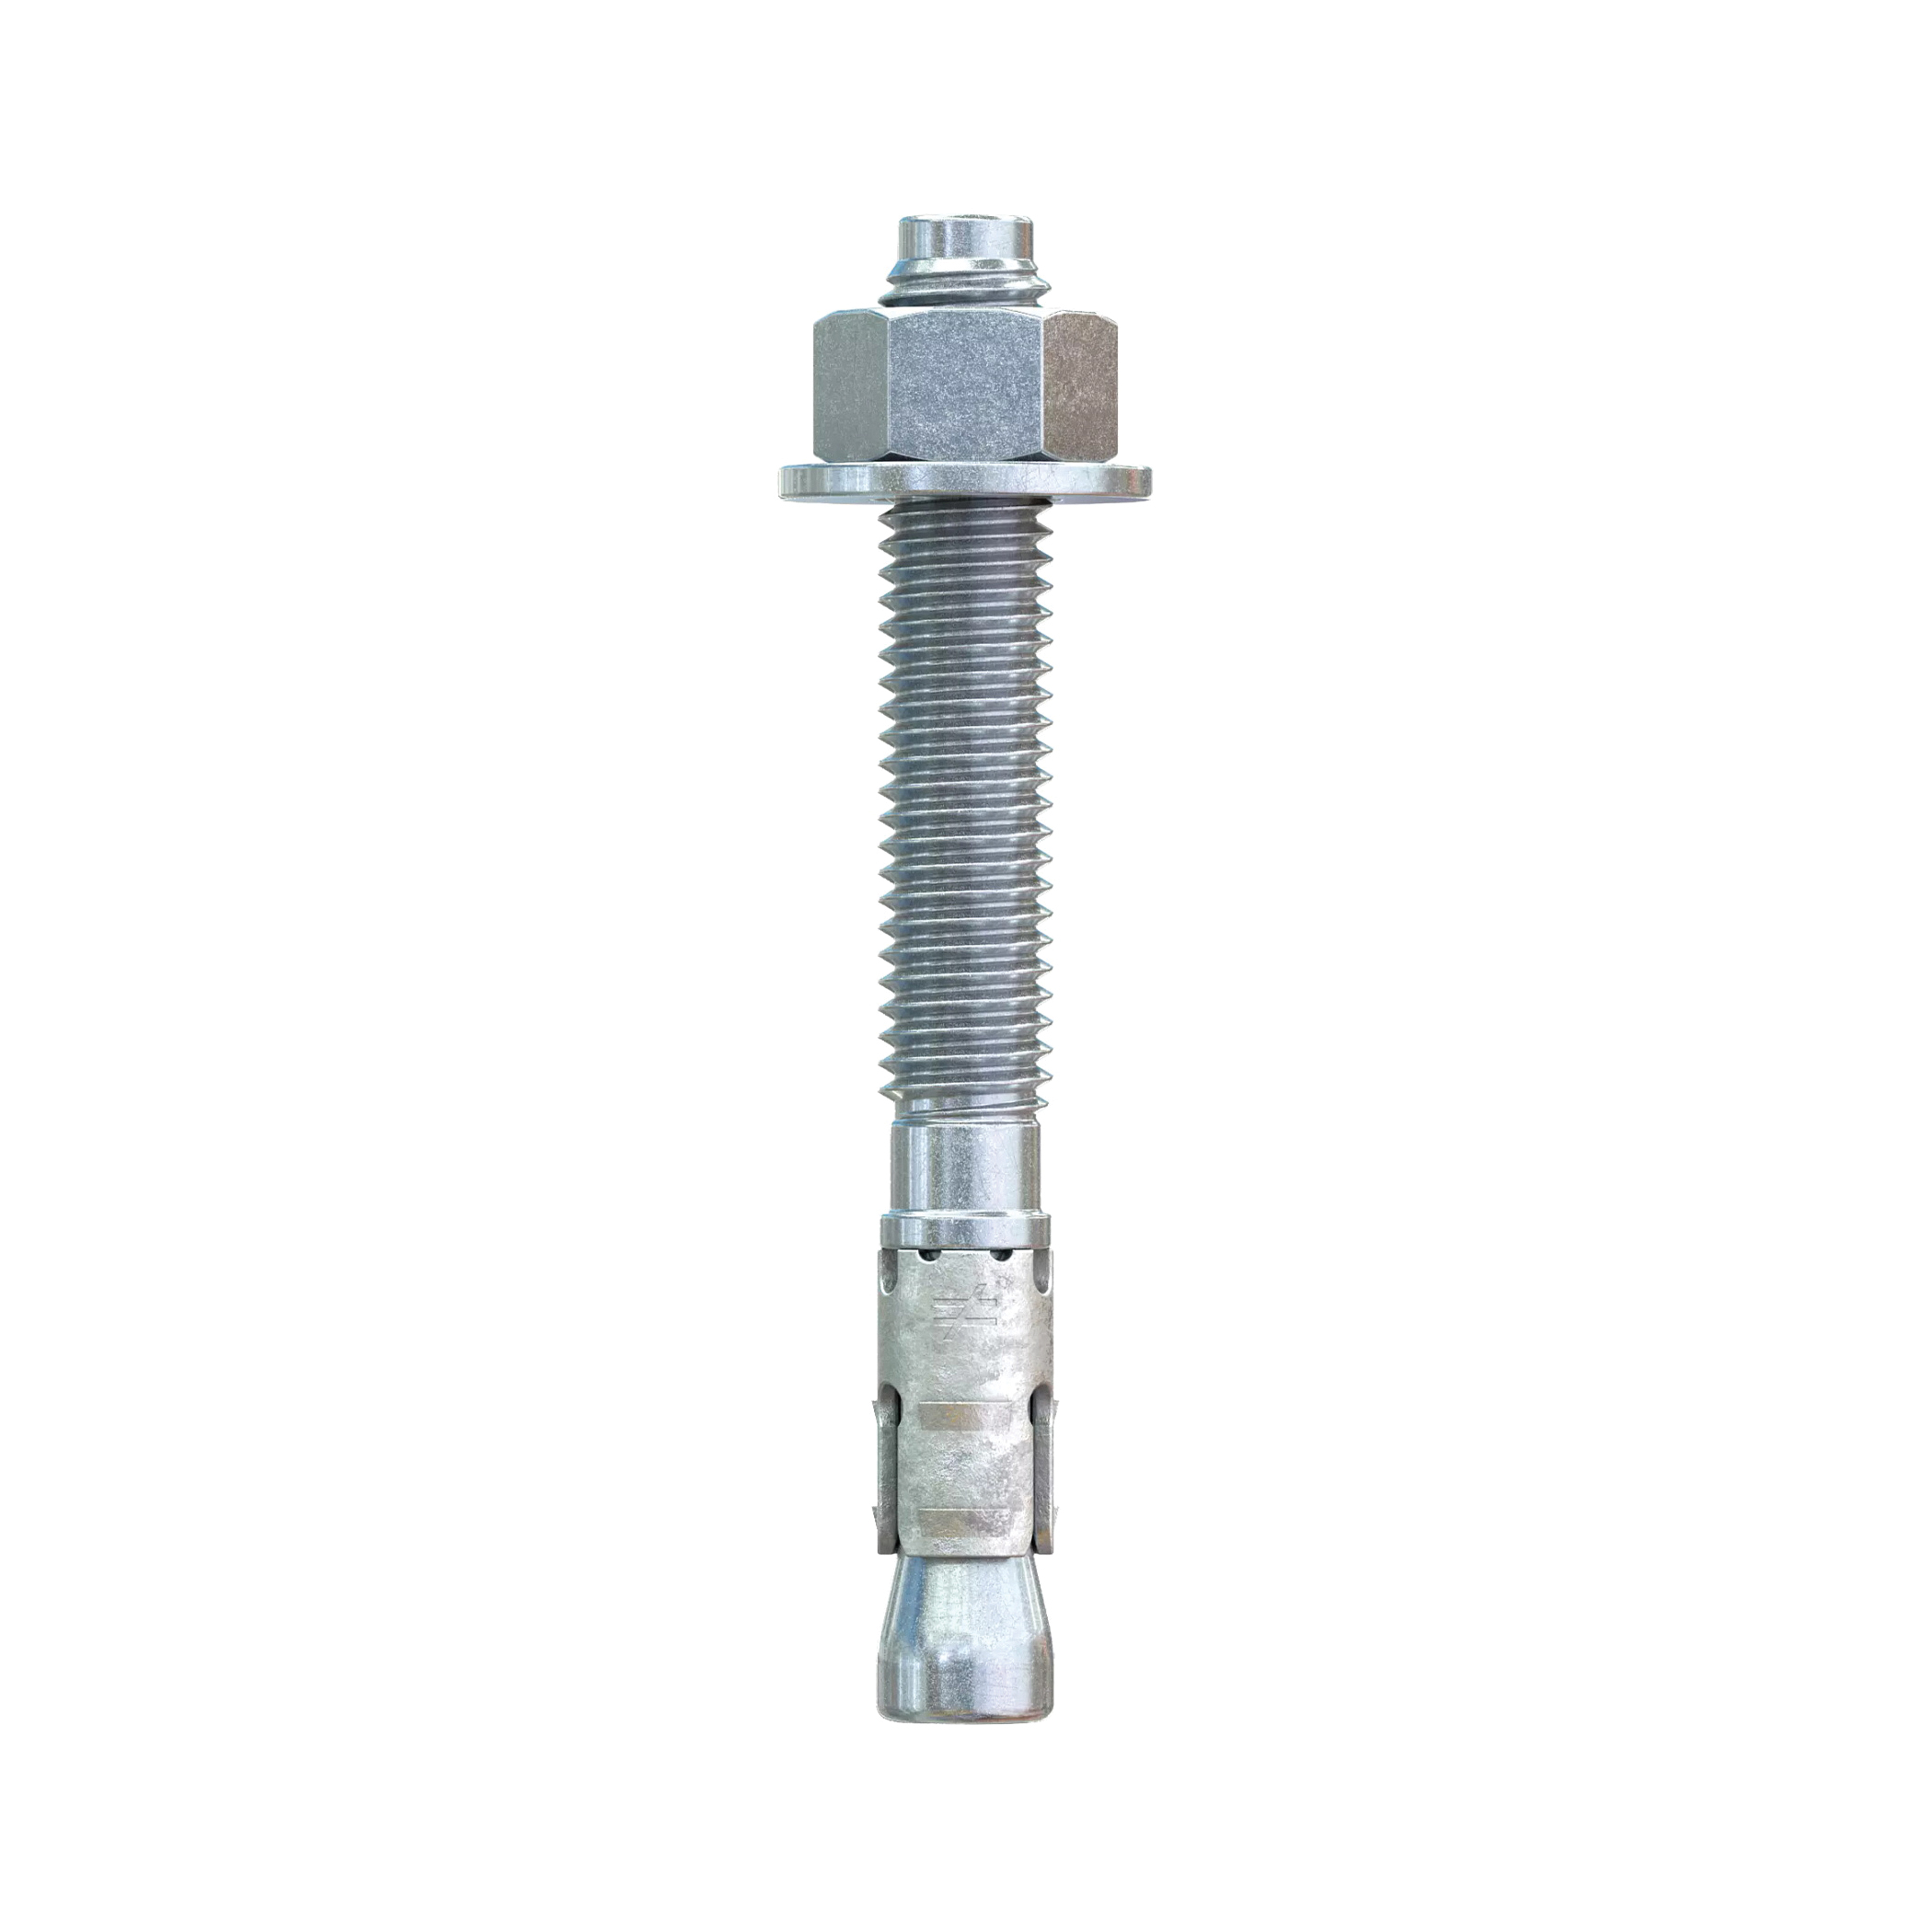 Strong-Bolt 2 STB2-50414P1 Wedge Anchor, 1/2 in Dia, 4-1/4 in OAL, Carbon Steel, Zinc